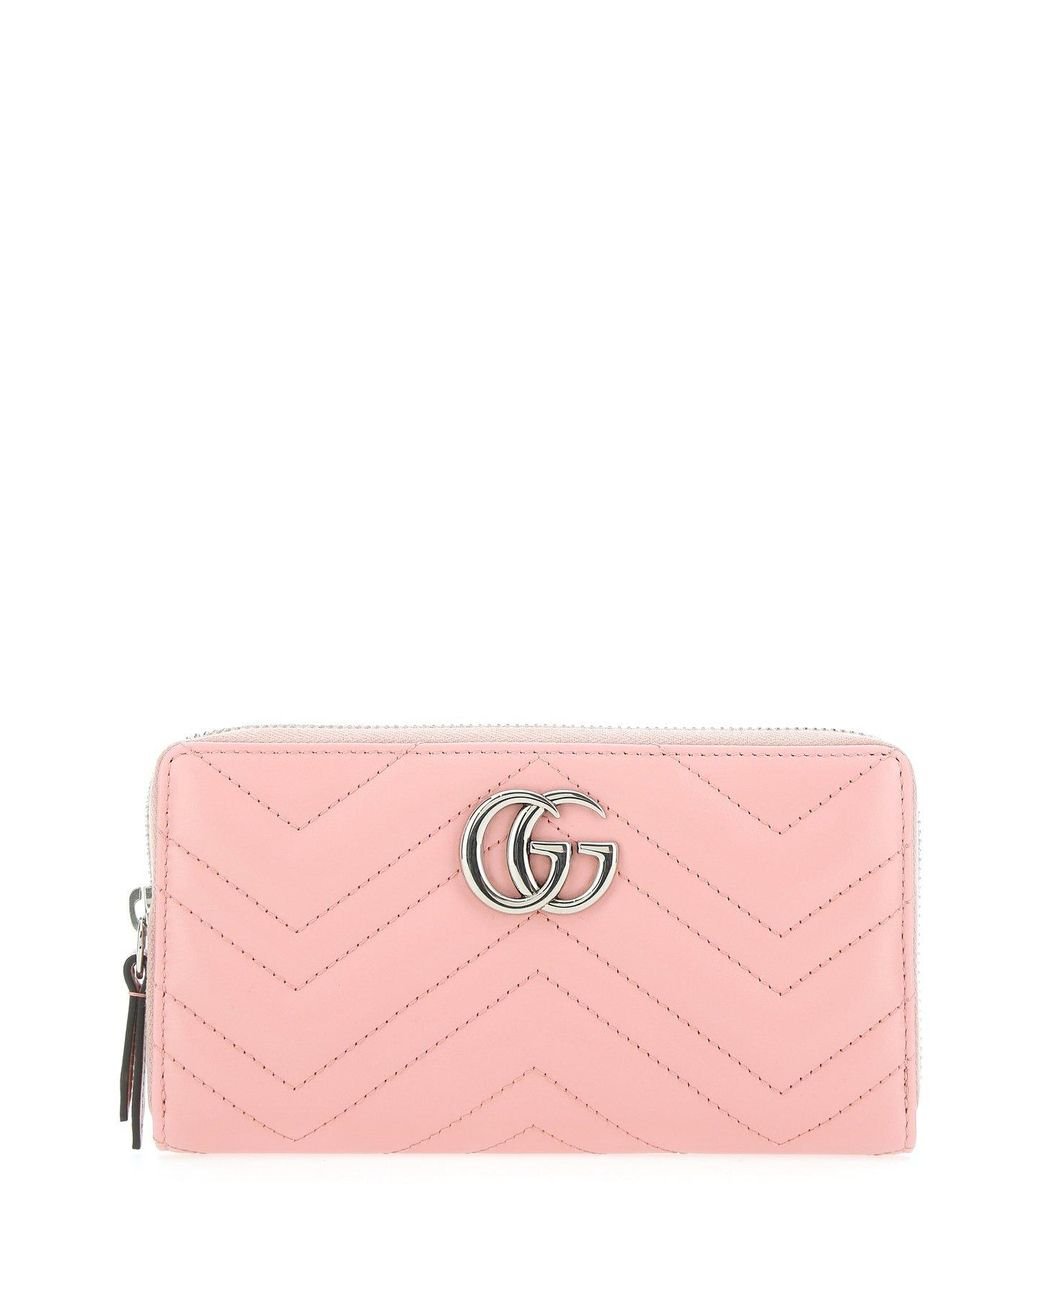 Gucci Leather GG Marmont Zip Around Wallet in Pink - Lyst